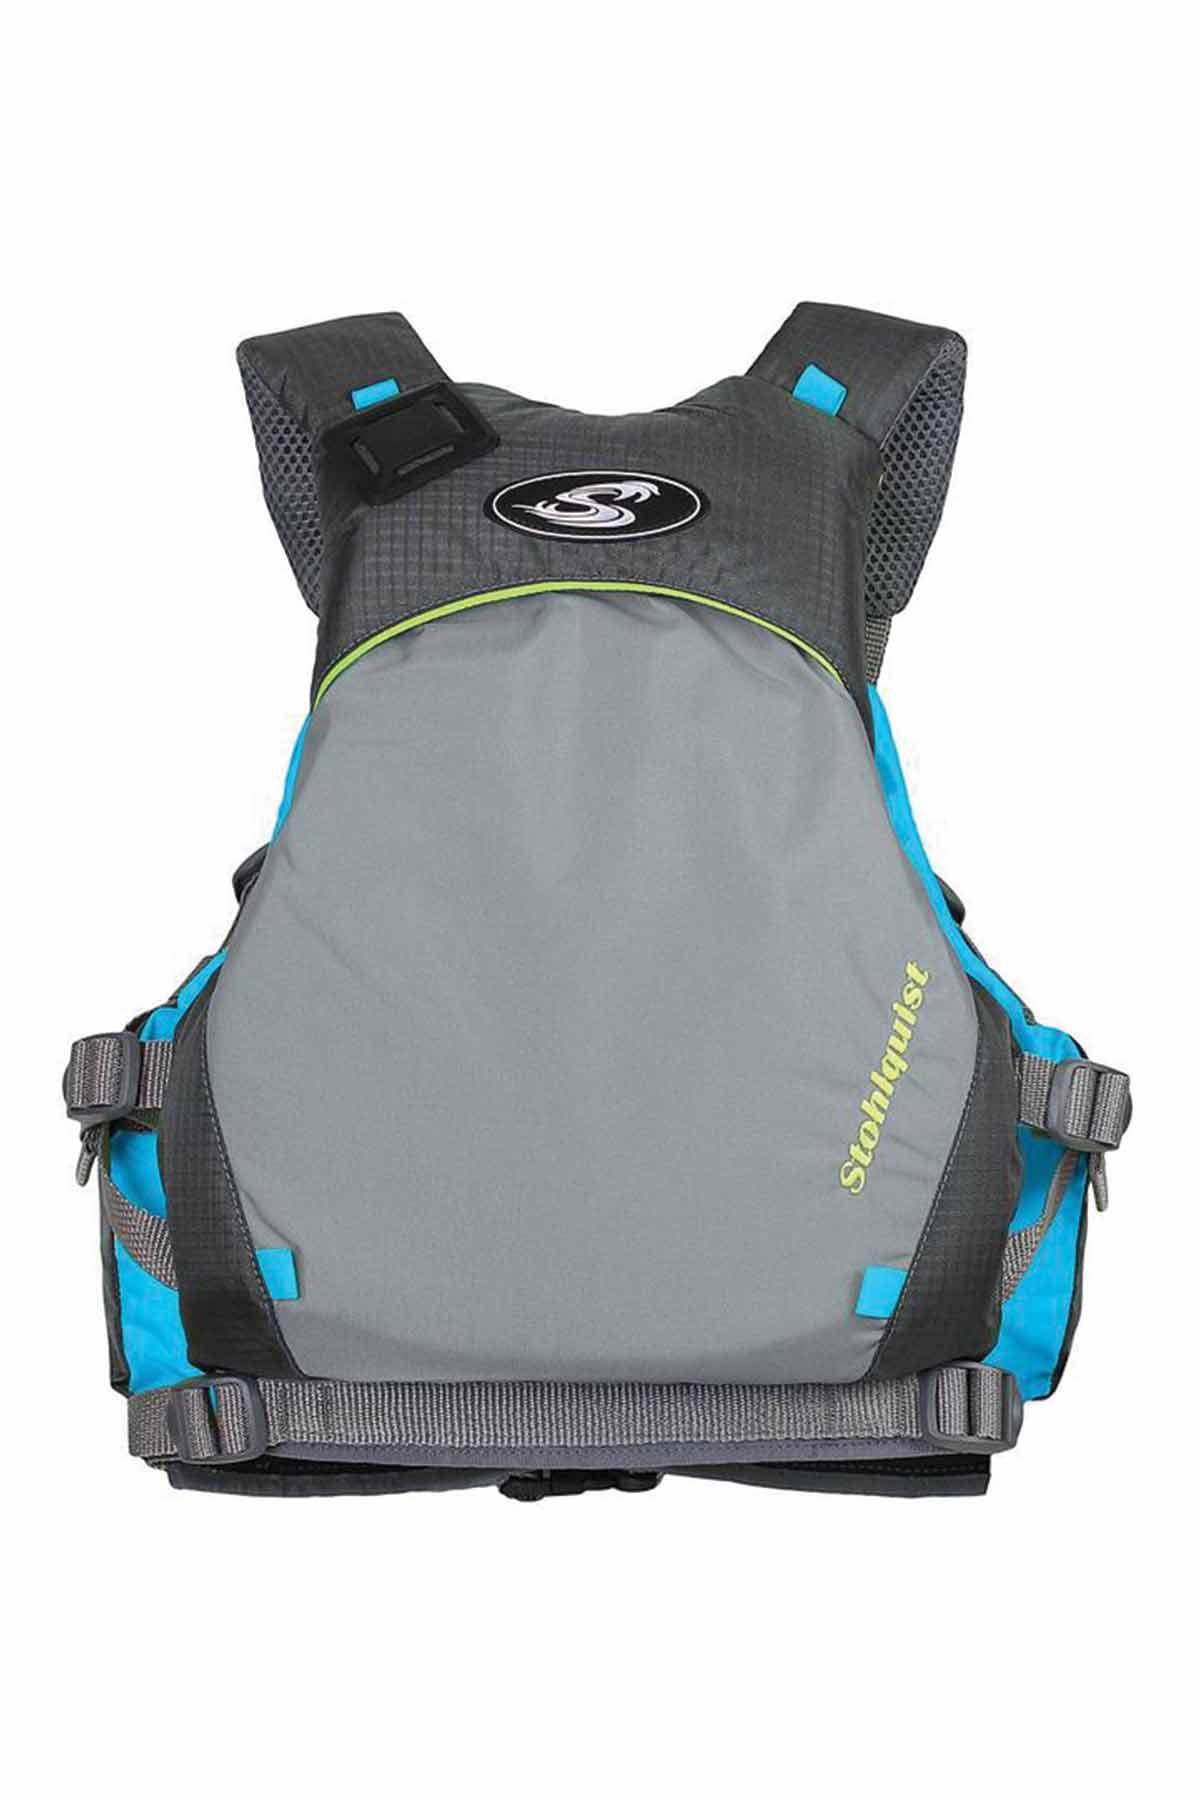 Stohlquist Women's Specific PFD with Wrapture Foam Gray Back